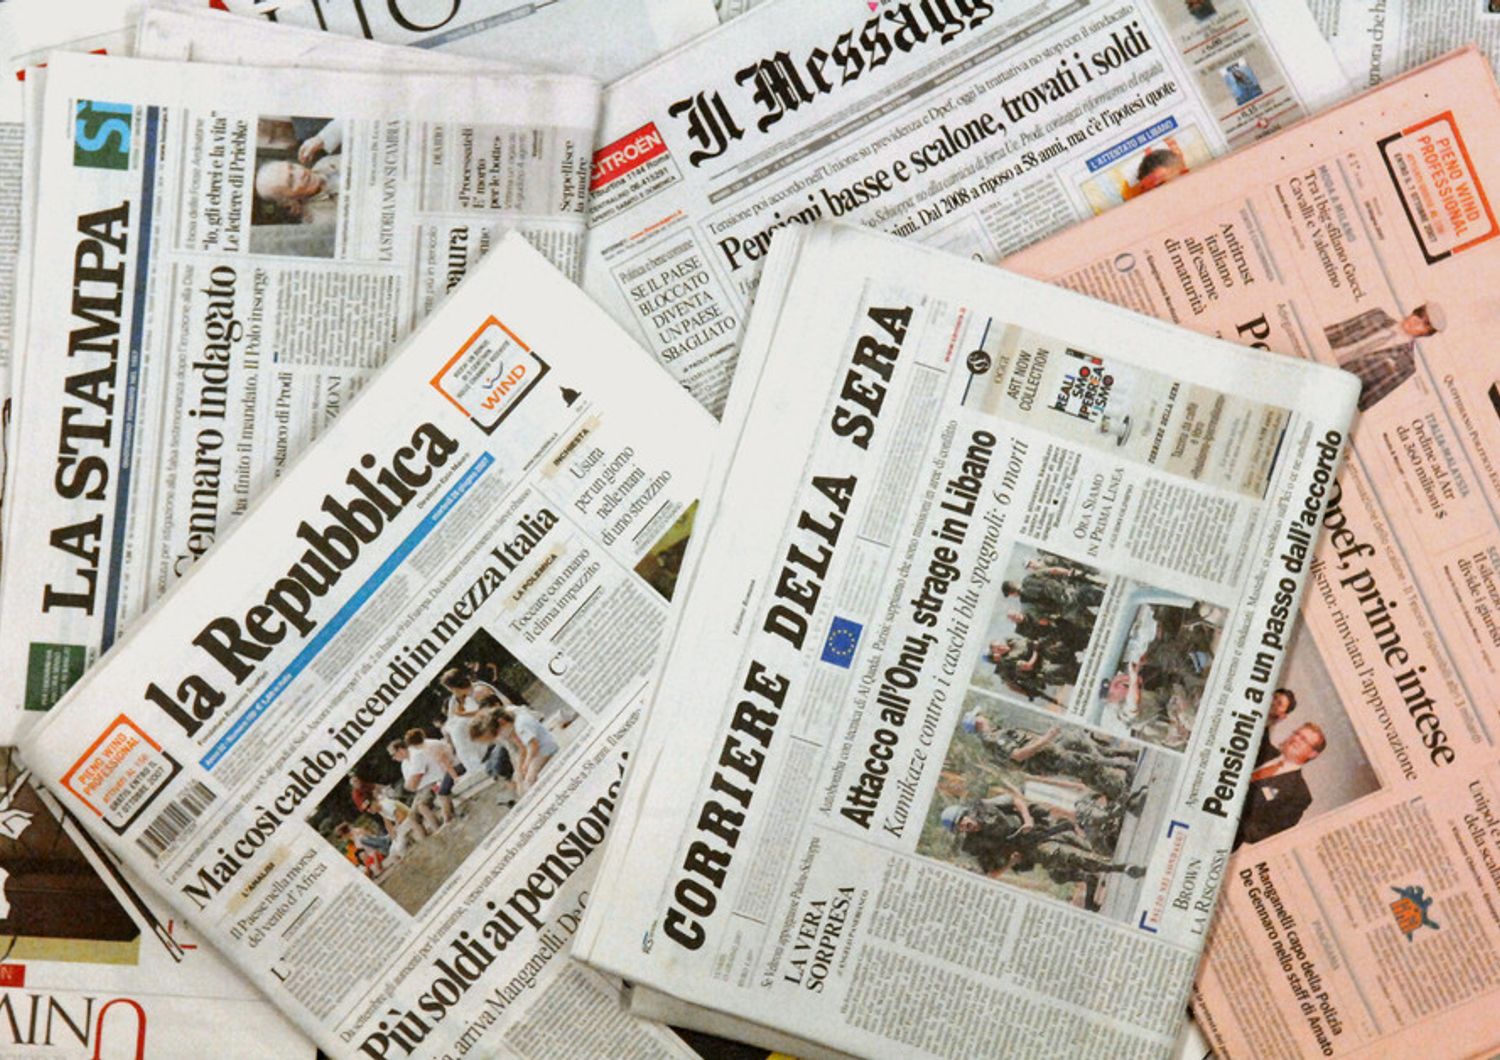 giornali quotidiani stampa (Agf)